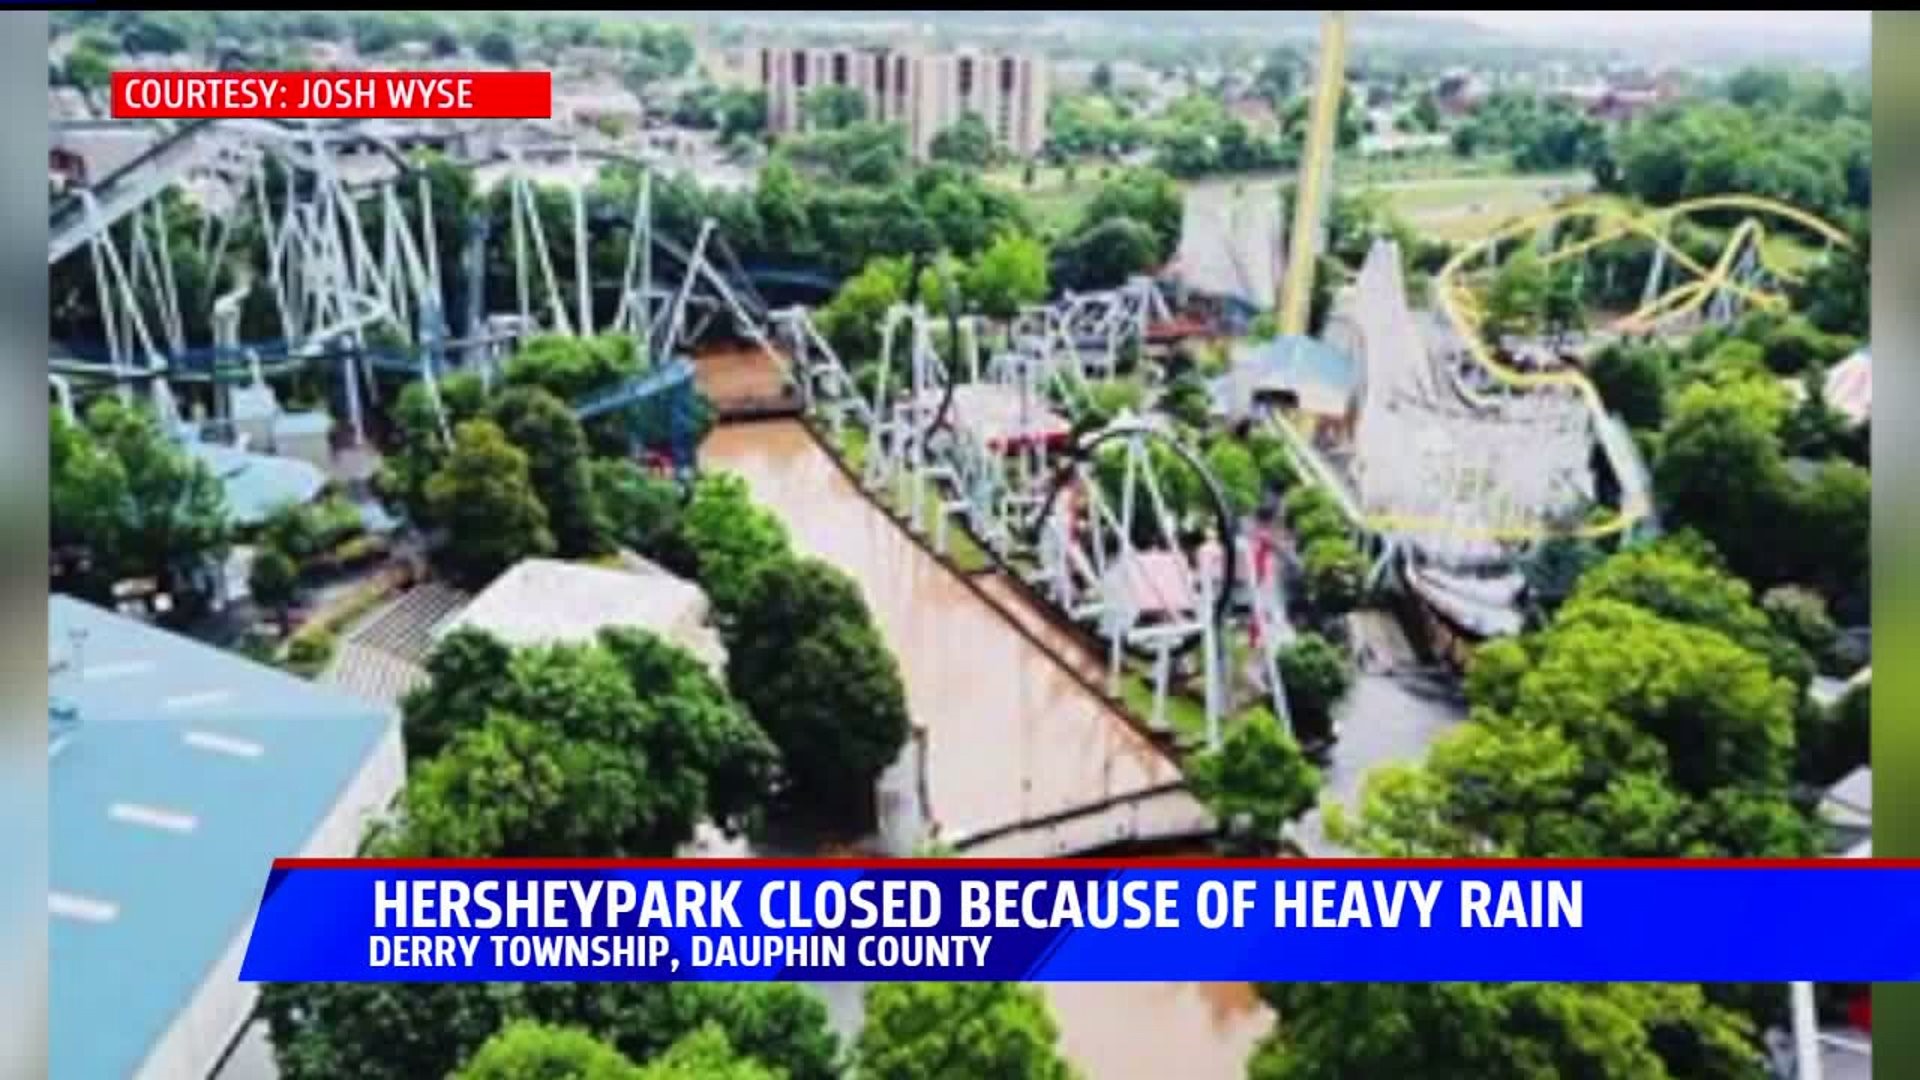 LIVE FROM HERSHEYPARK - REACTION TO CLOSURE